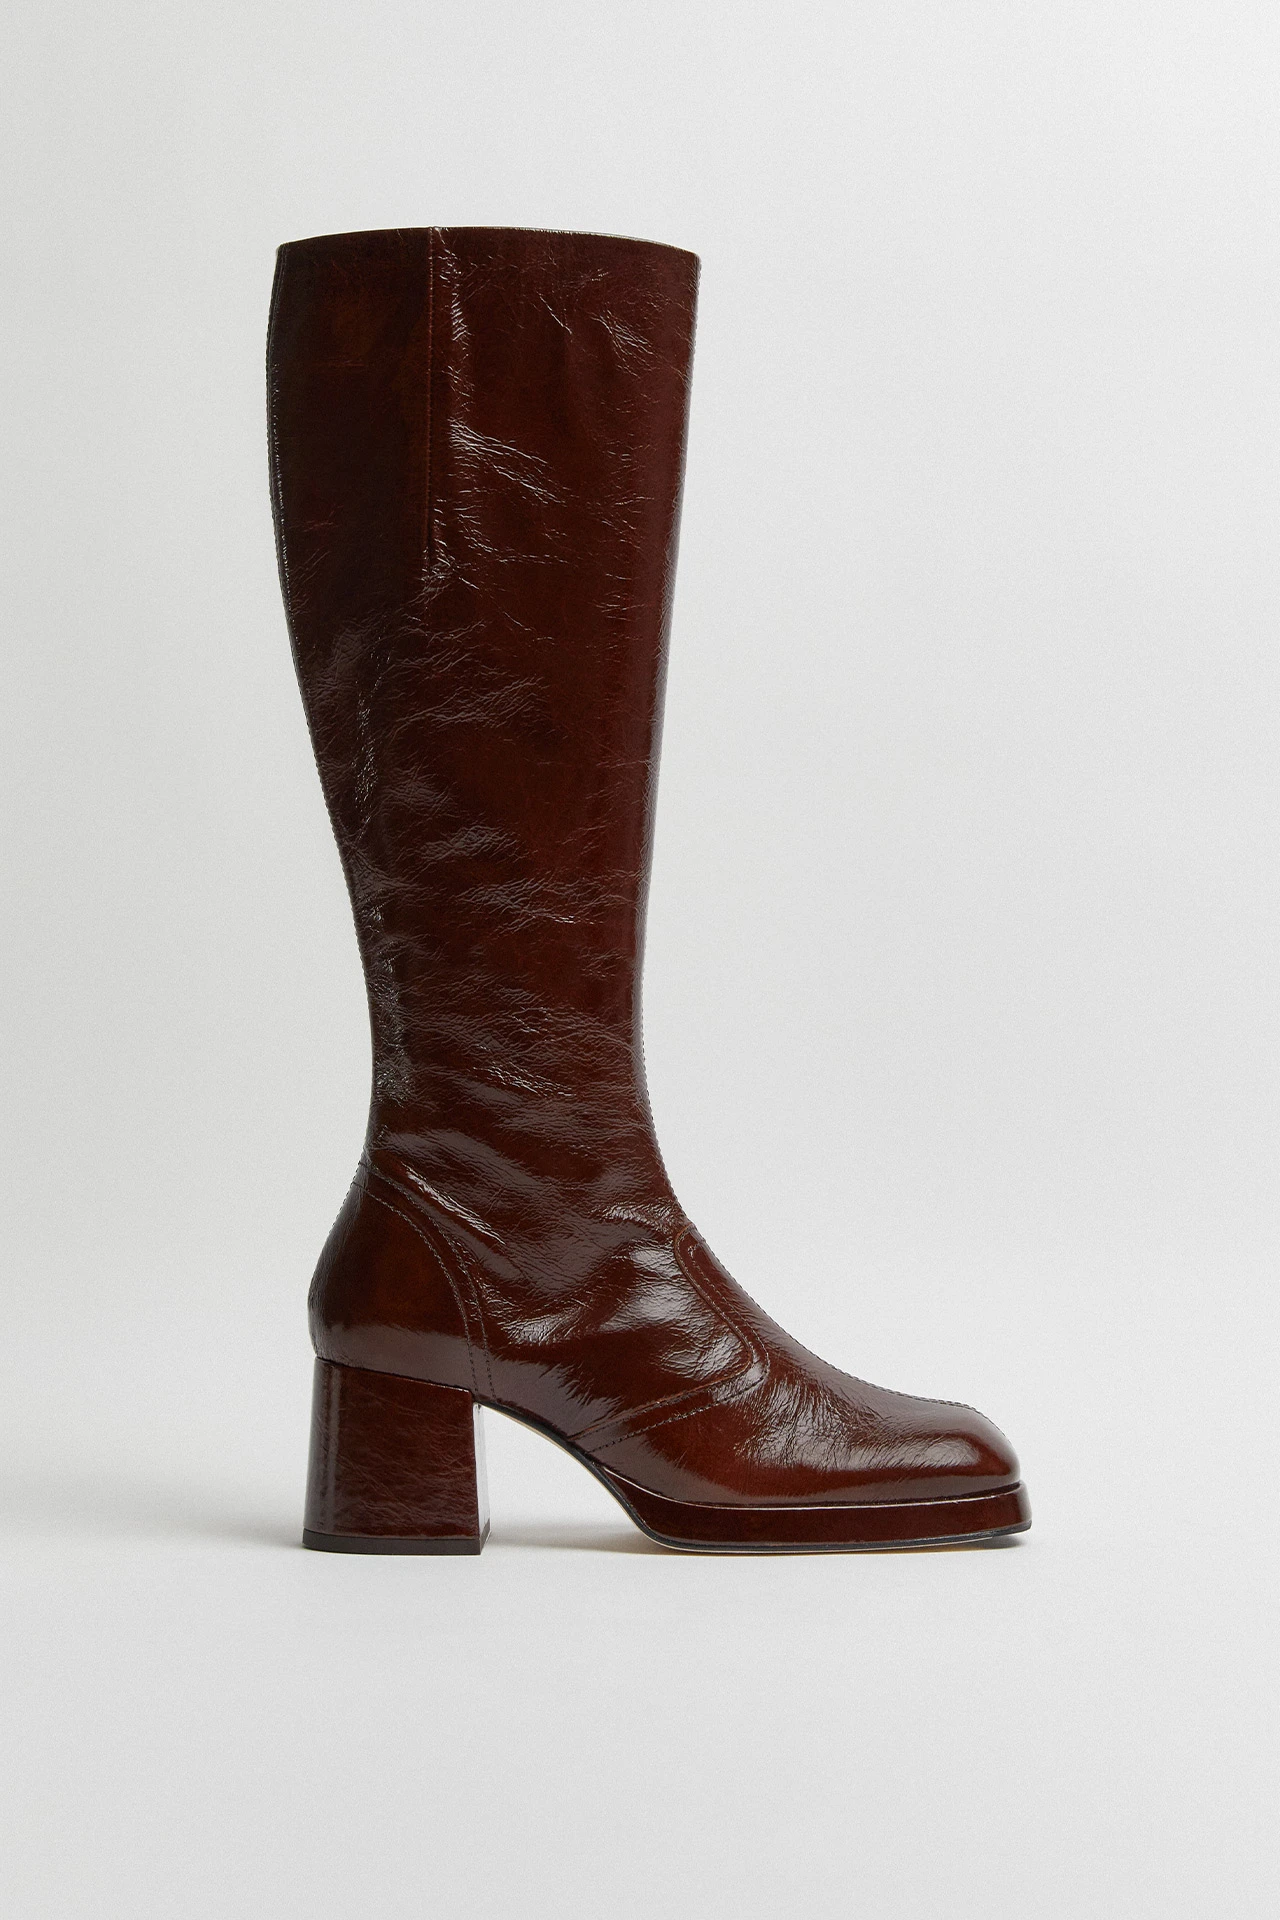 Miista-donna-crinkle-brown-tall-boots-01